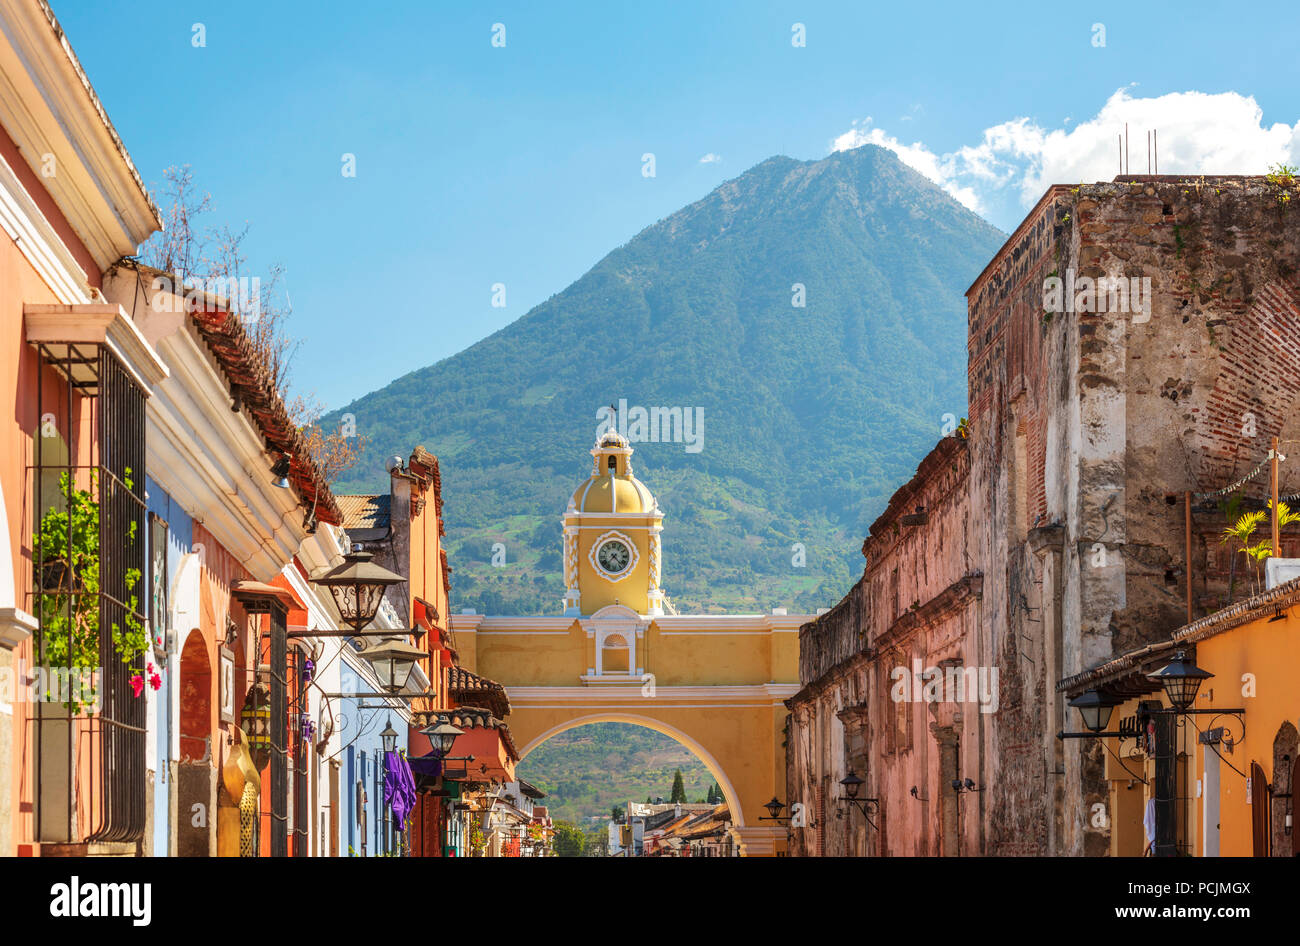 Antigua Guatemala, classic colonial town with famous Arco de Santa Catalina and Volcan de Agua behind Stock Photo